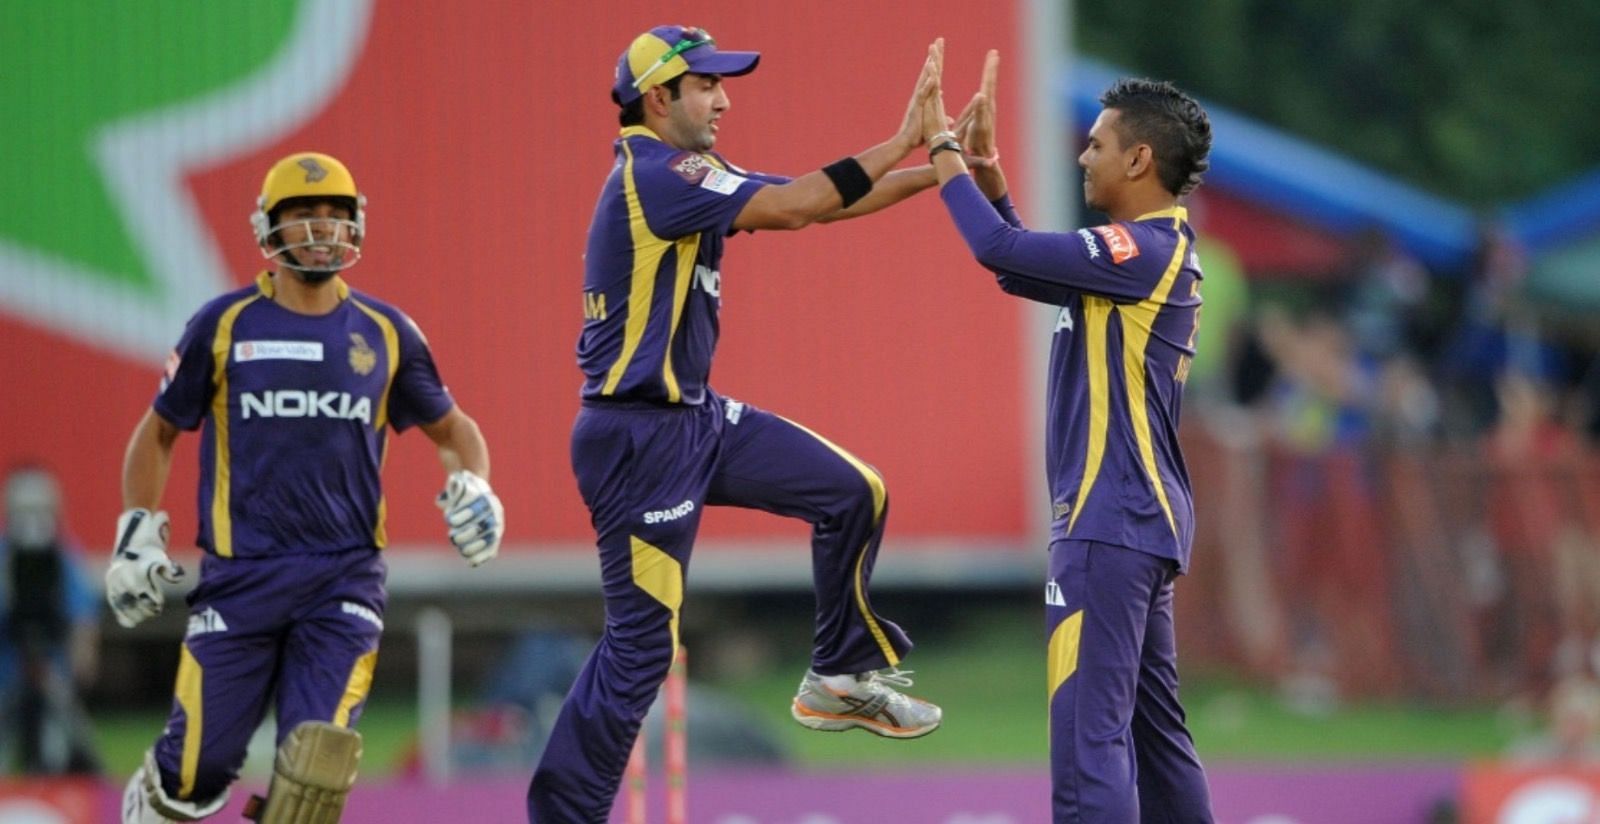 Sunil Narine (R) became instantly popular upon joining the Kolkata Knight Riders.